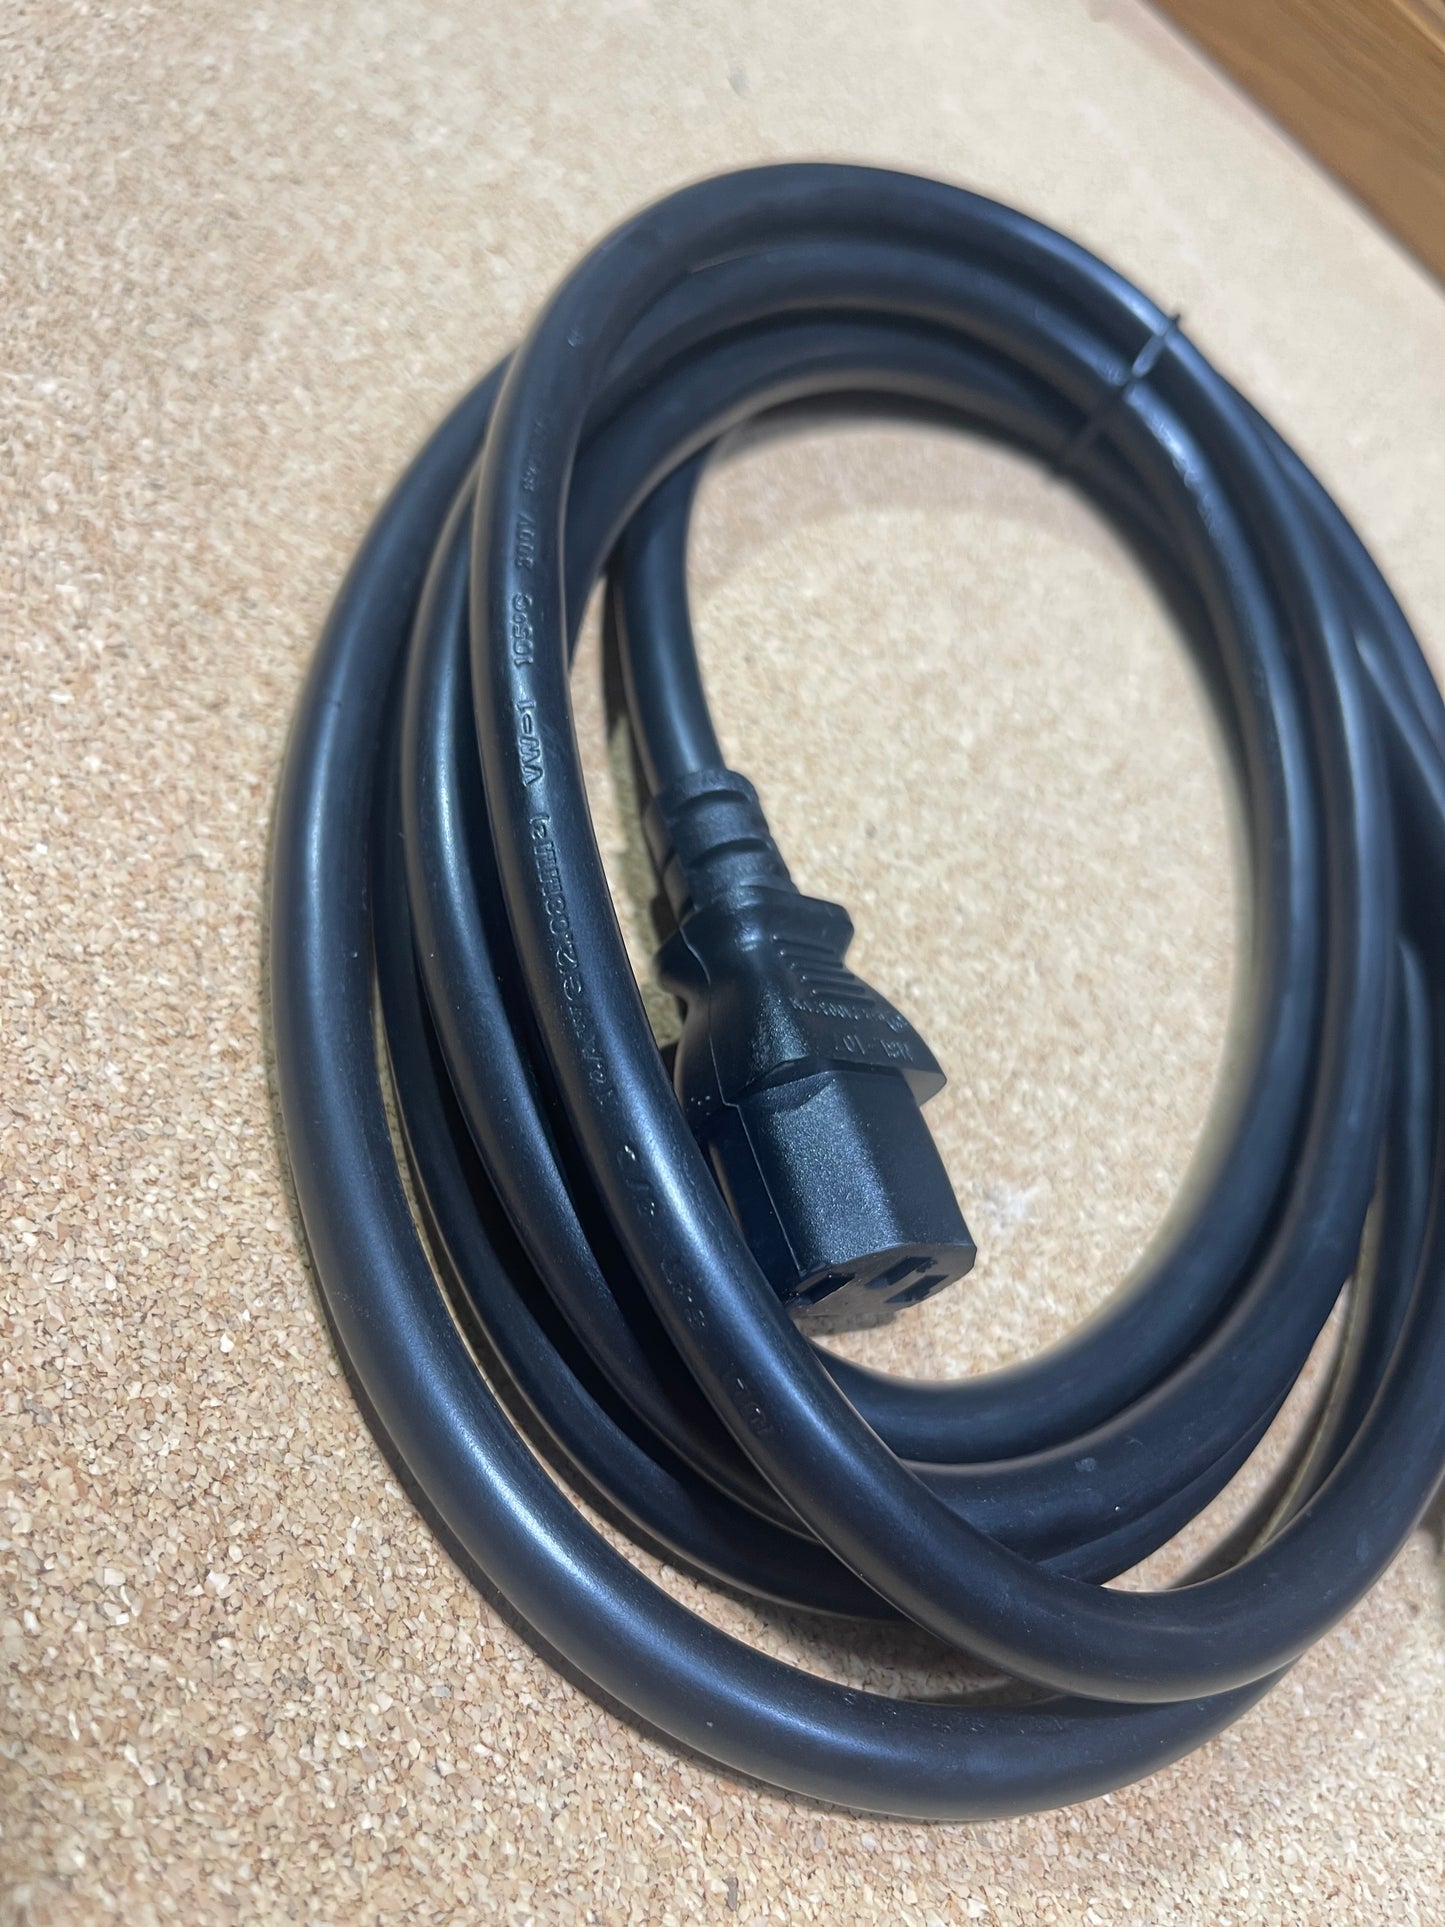 Peacemaker 120v replacement power cord only